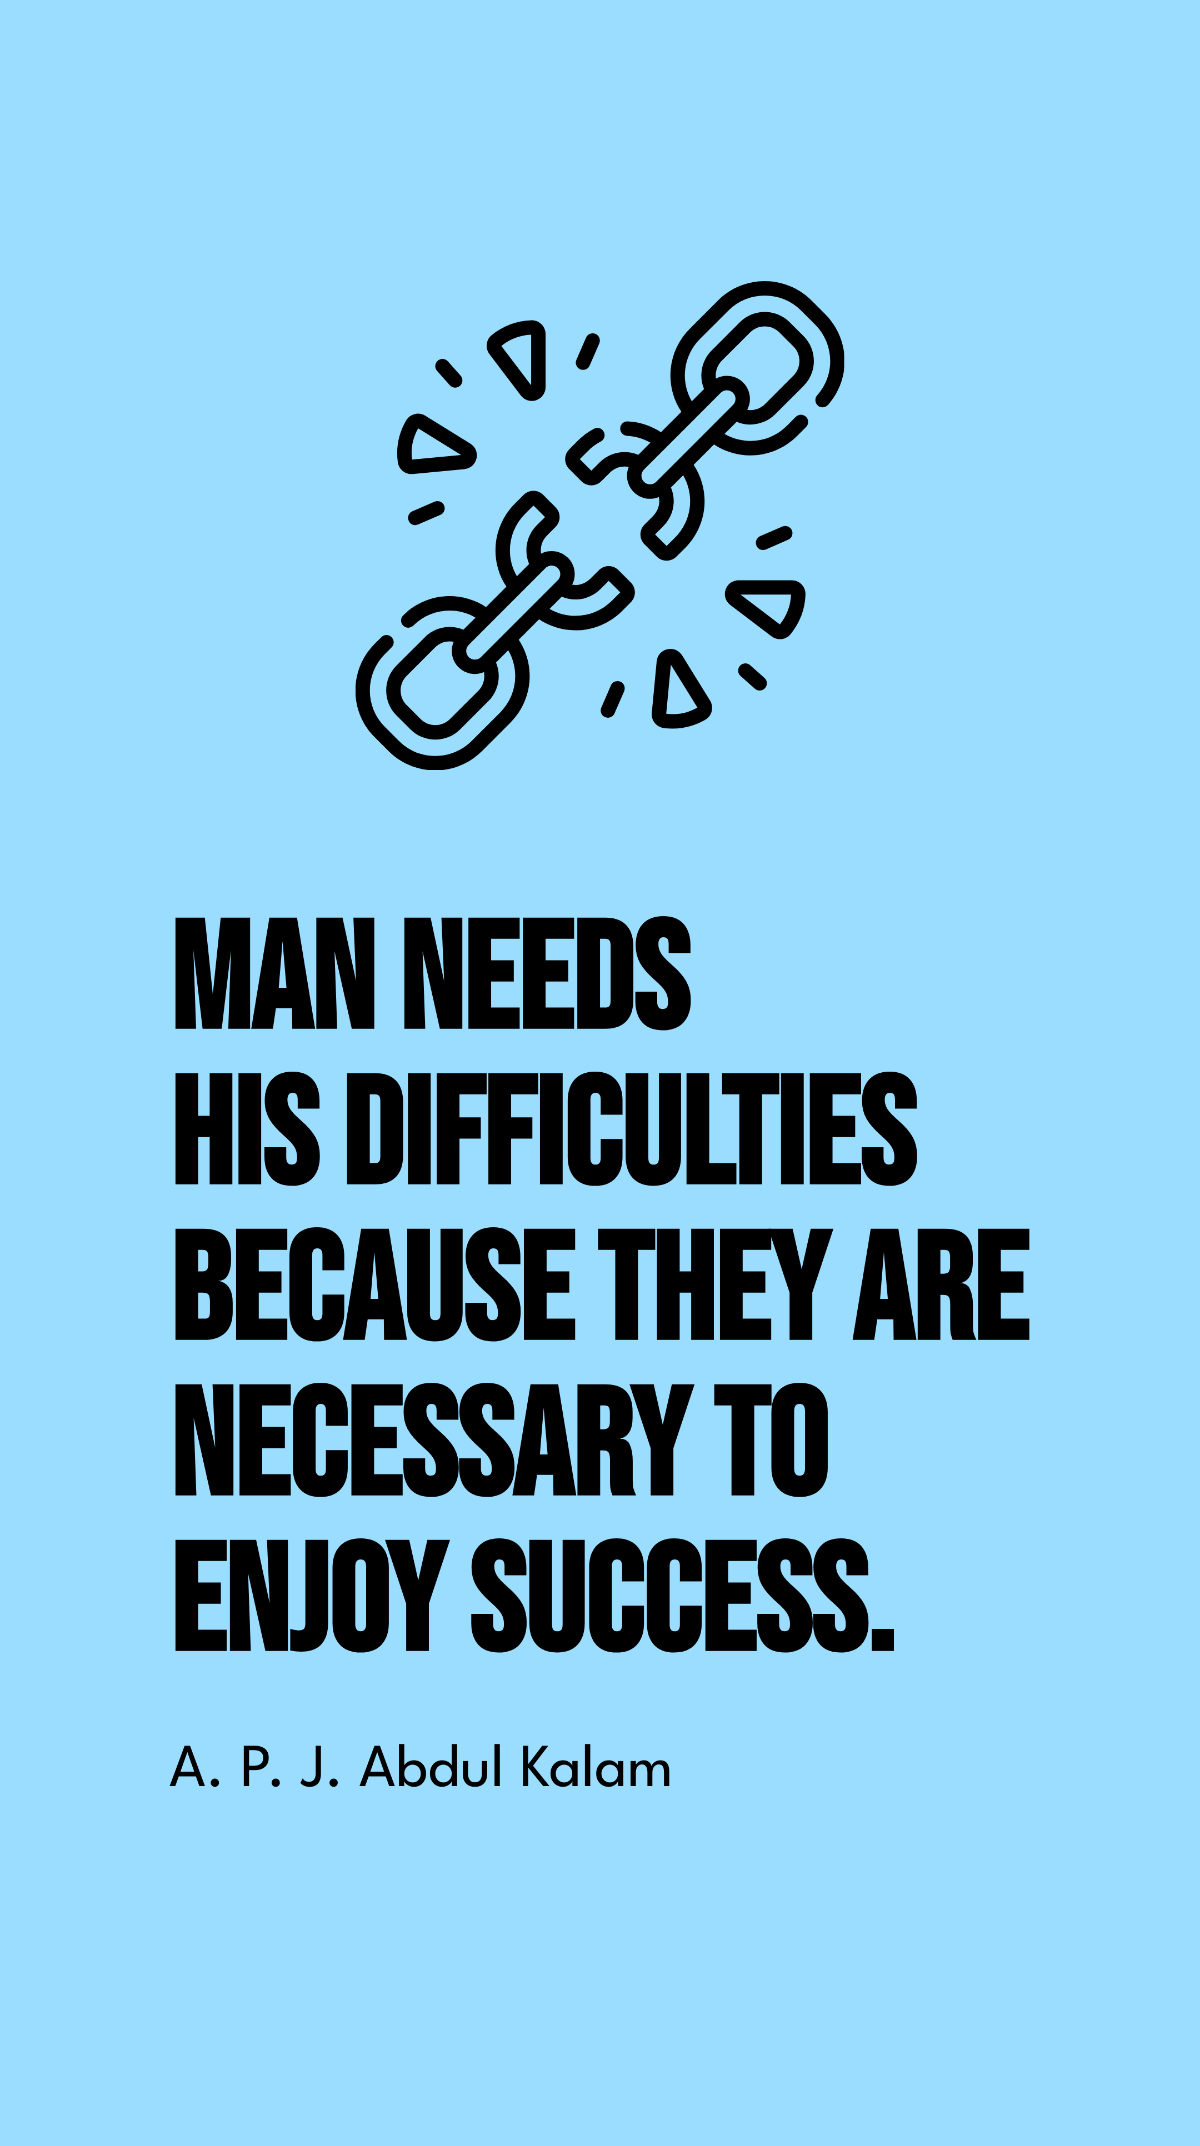 A. P. J. Abdul Kalam - Man needs his difficulties because they are necessary to enjoy success. Template